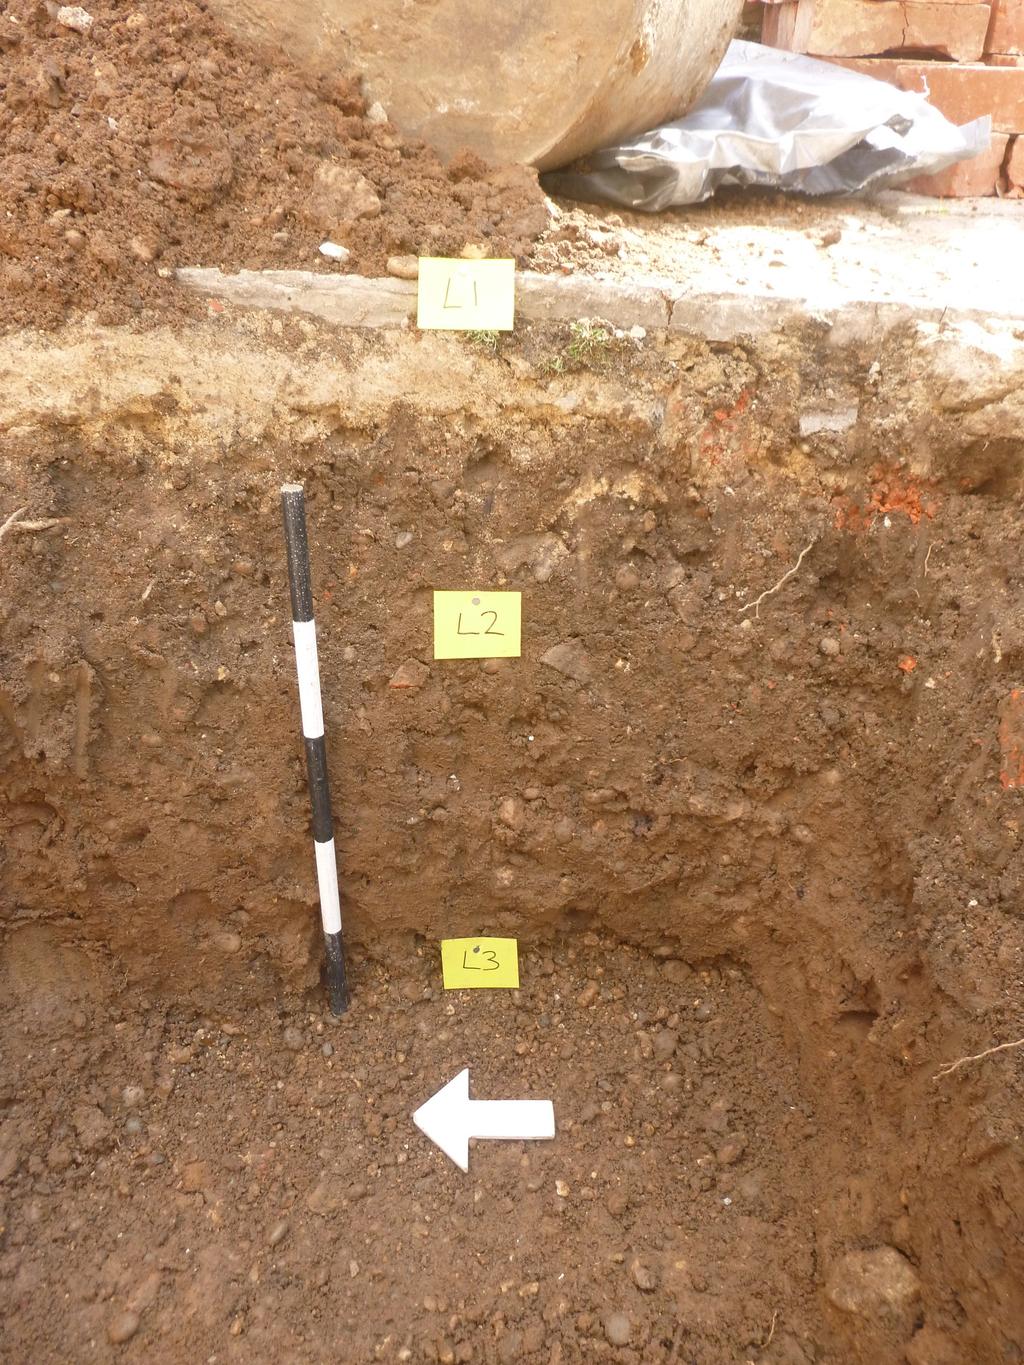 CAT Report 1100: Archaeological monitoring and recording at 24 St Peter's Road, West Mersea, Essex April 2017 Photograph 2 West-facing representative section of south foundation pit, looking E 5